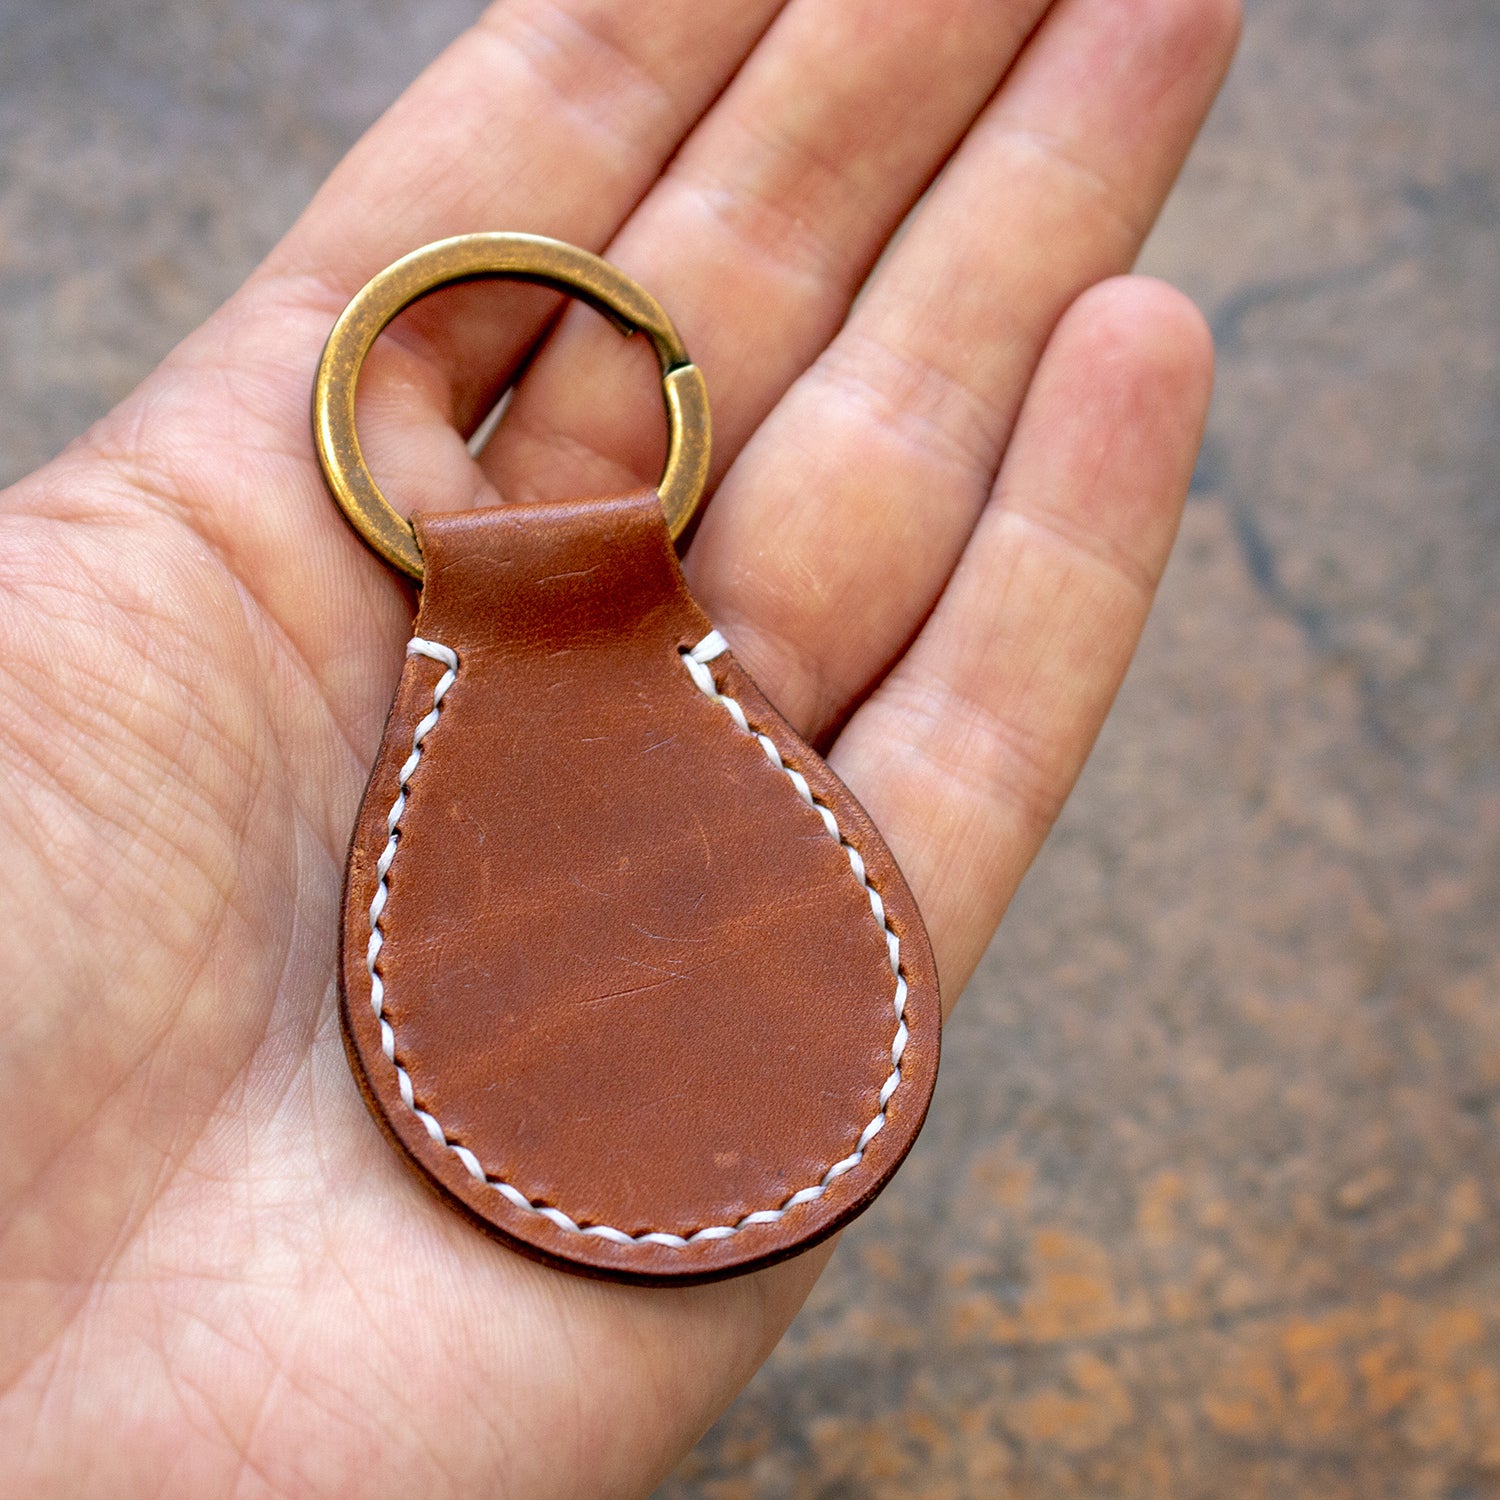 Durable Key Ring Key Clip with Template